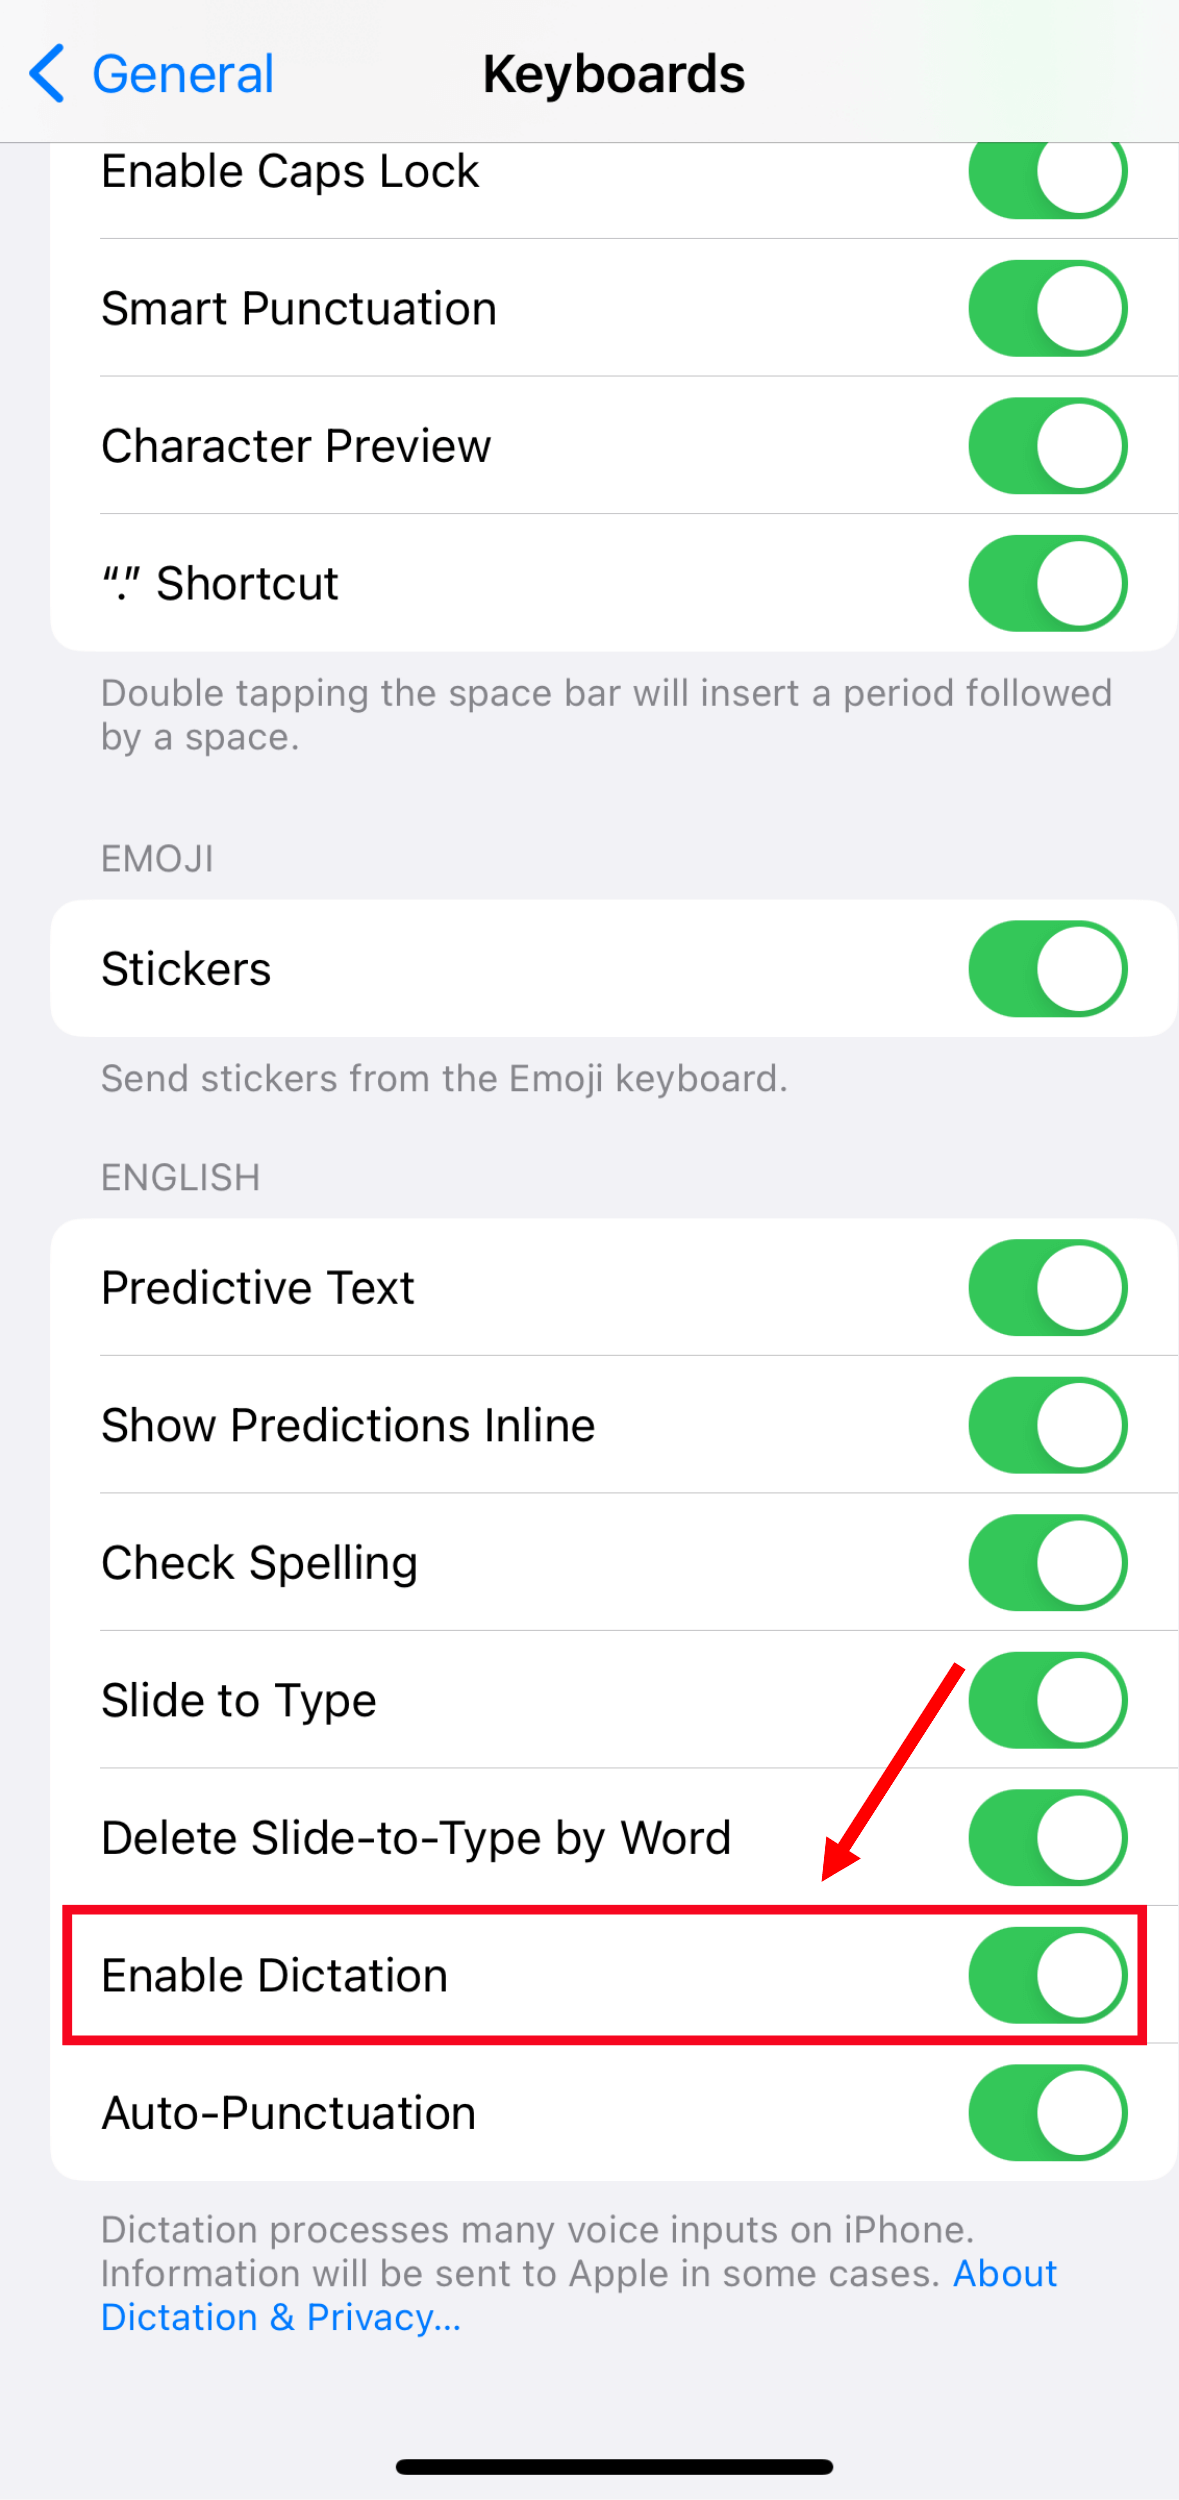 Turn on the toggle next to enable dictation feature